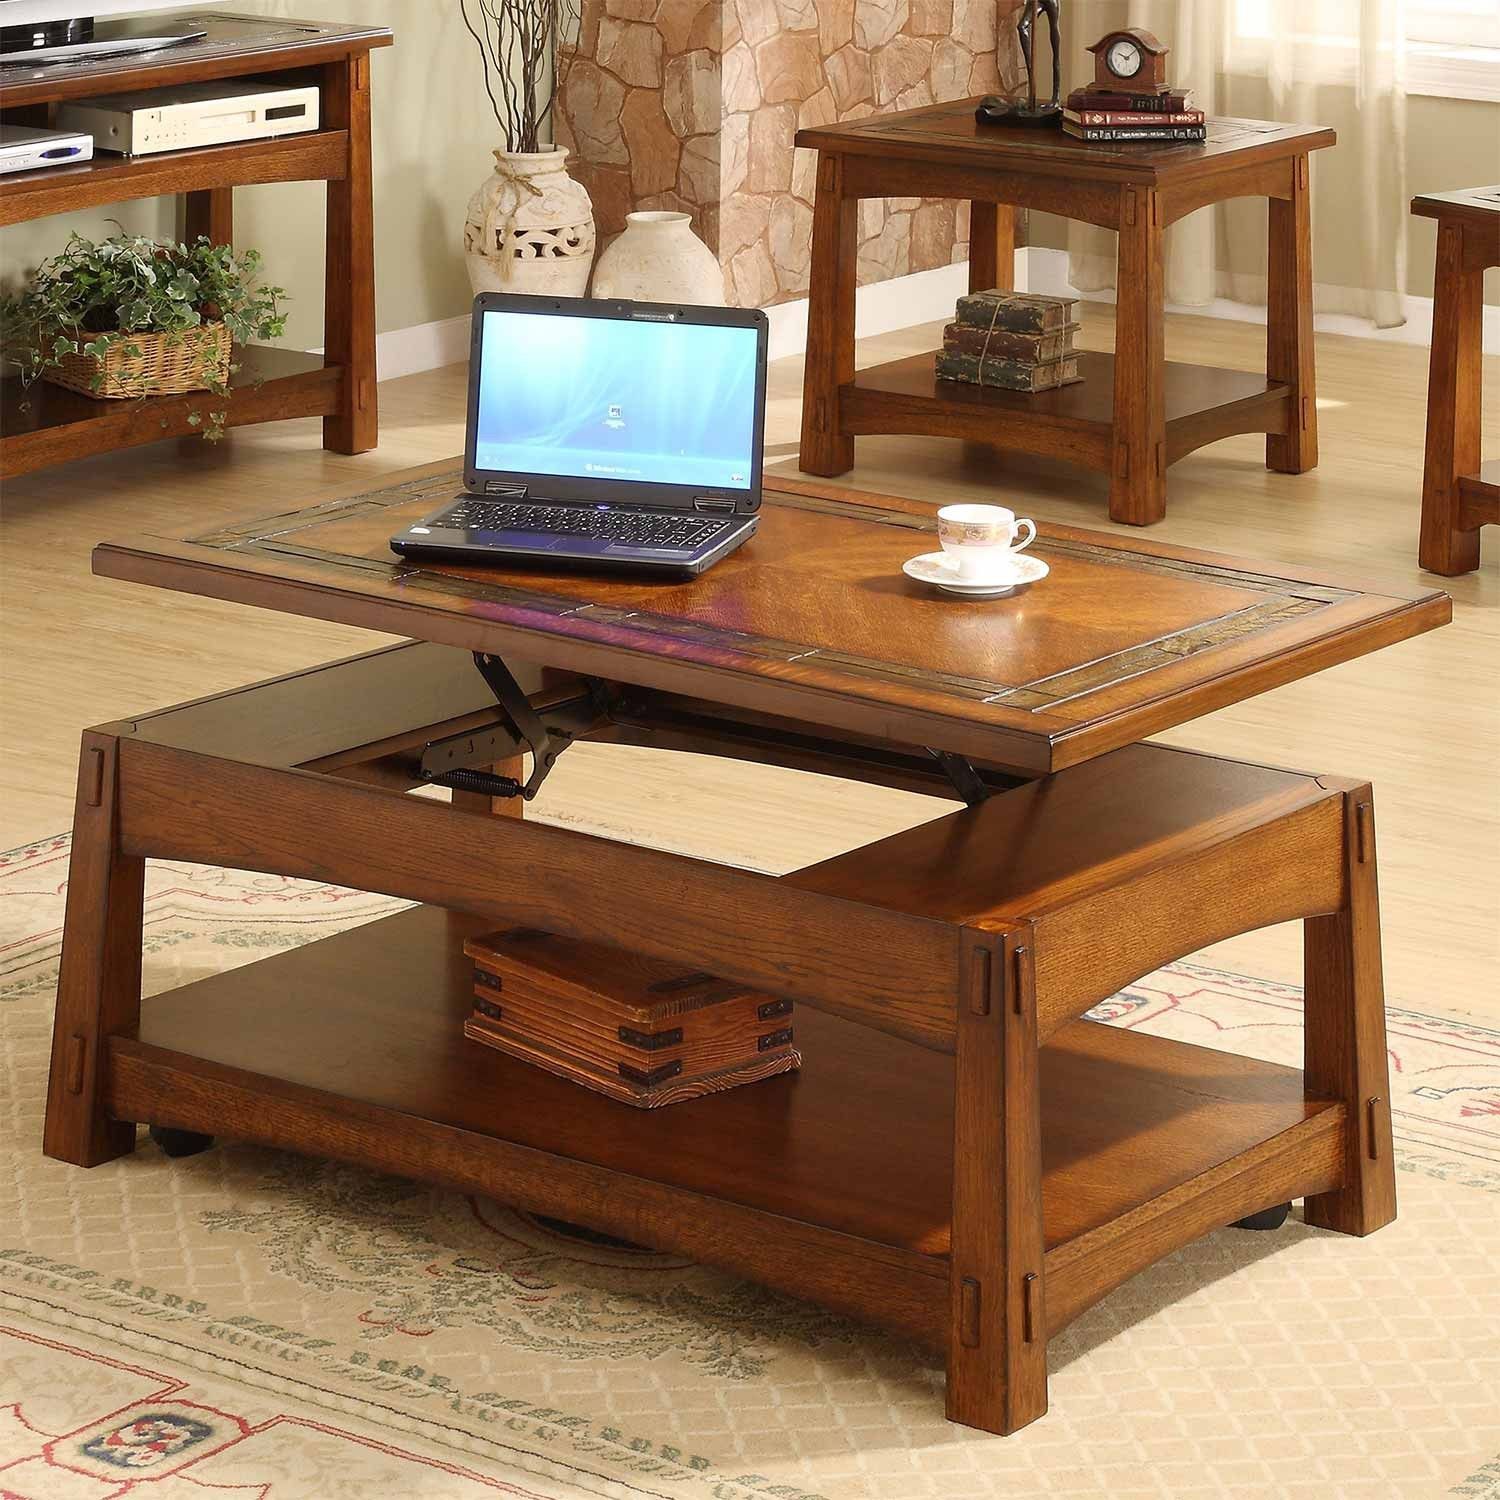 Craftsman Home Wood Lift Top Rectangular Coffee Table In Americana Oak Throughout Wood Lift Top Coffee Tables (View 15 of 15)